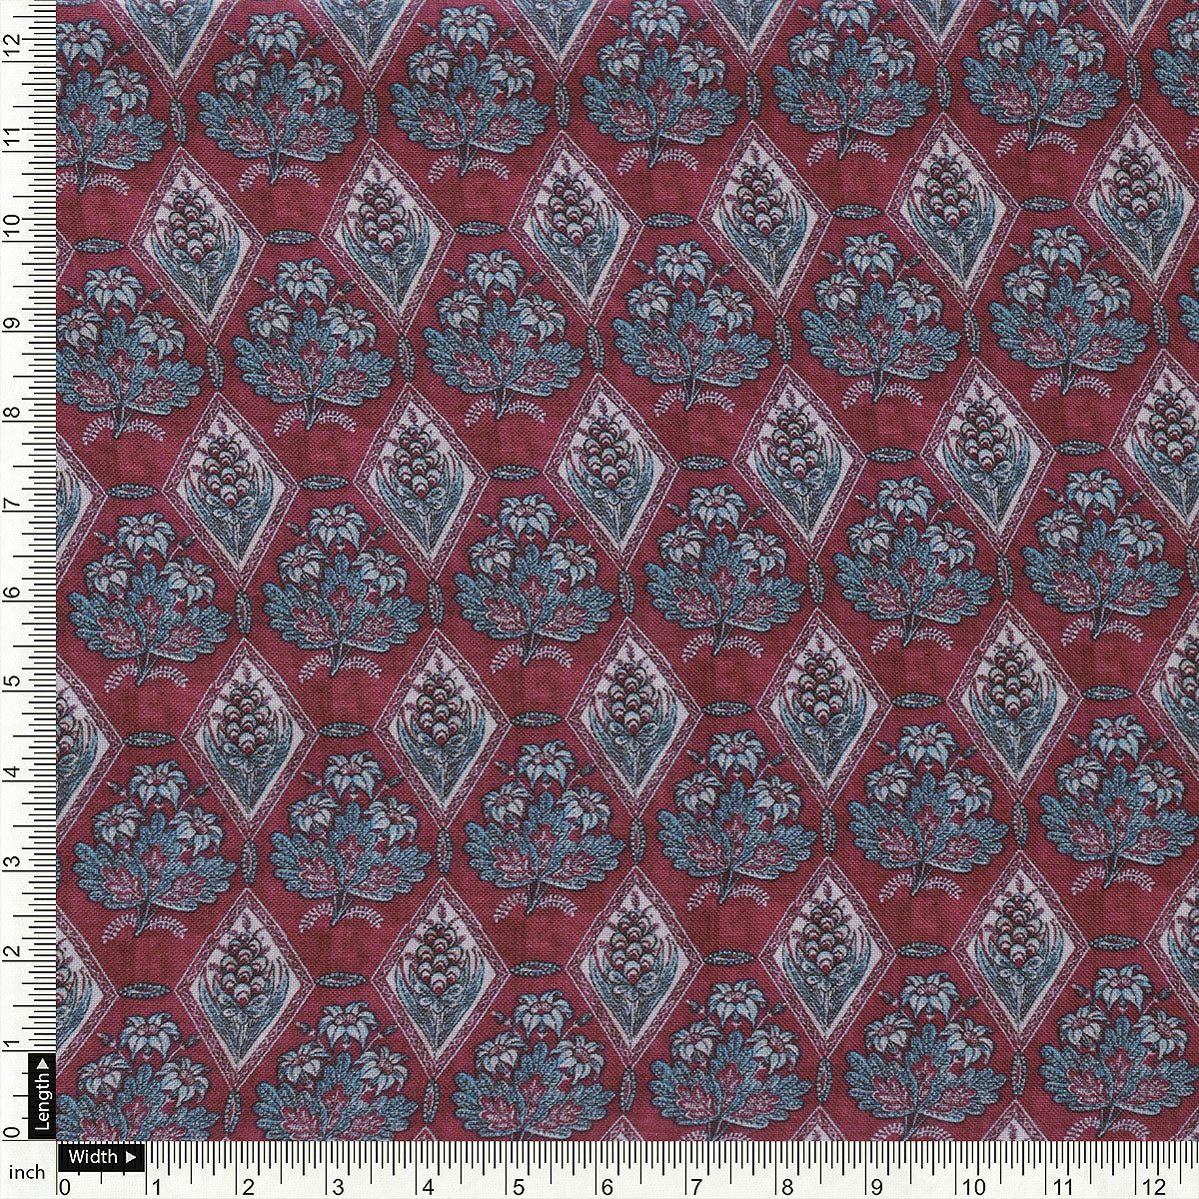 Morden Damask With Flower Digital Printed Fabric - Rayon